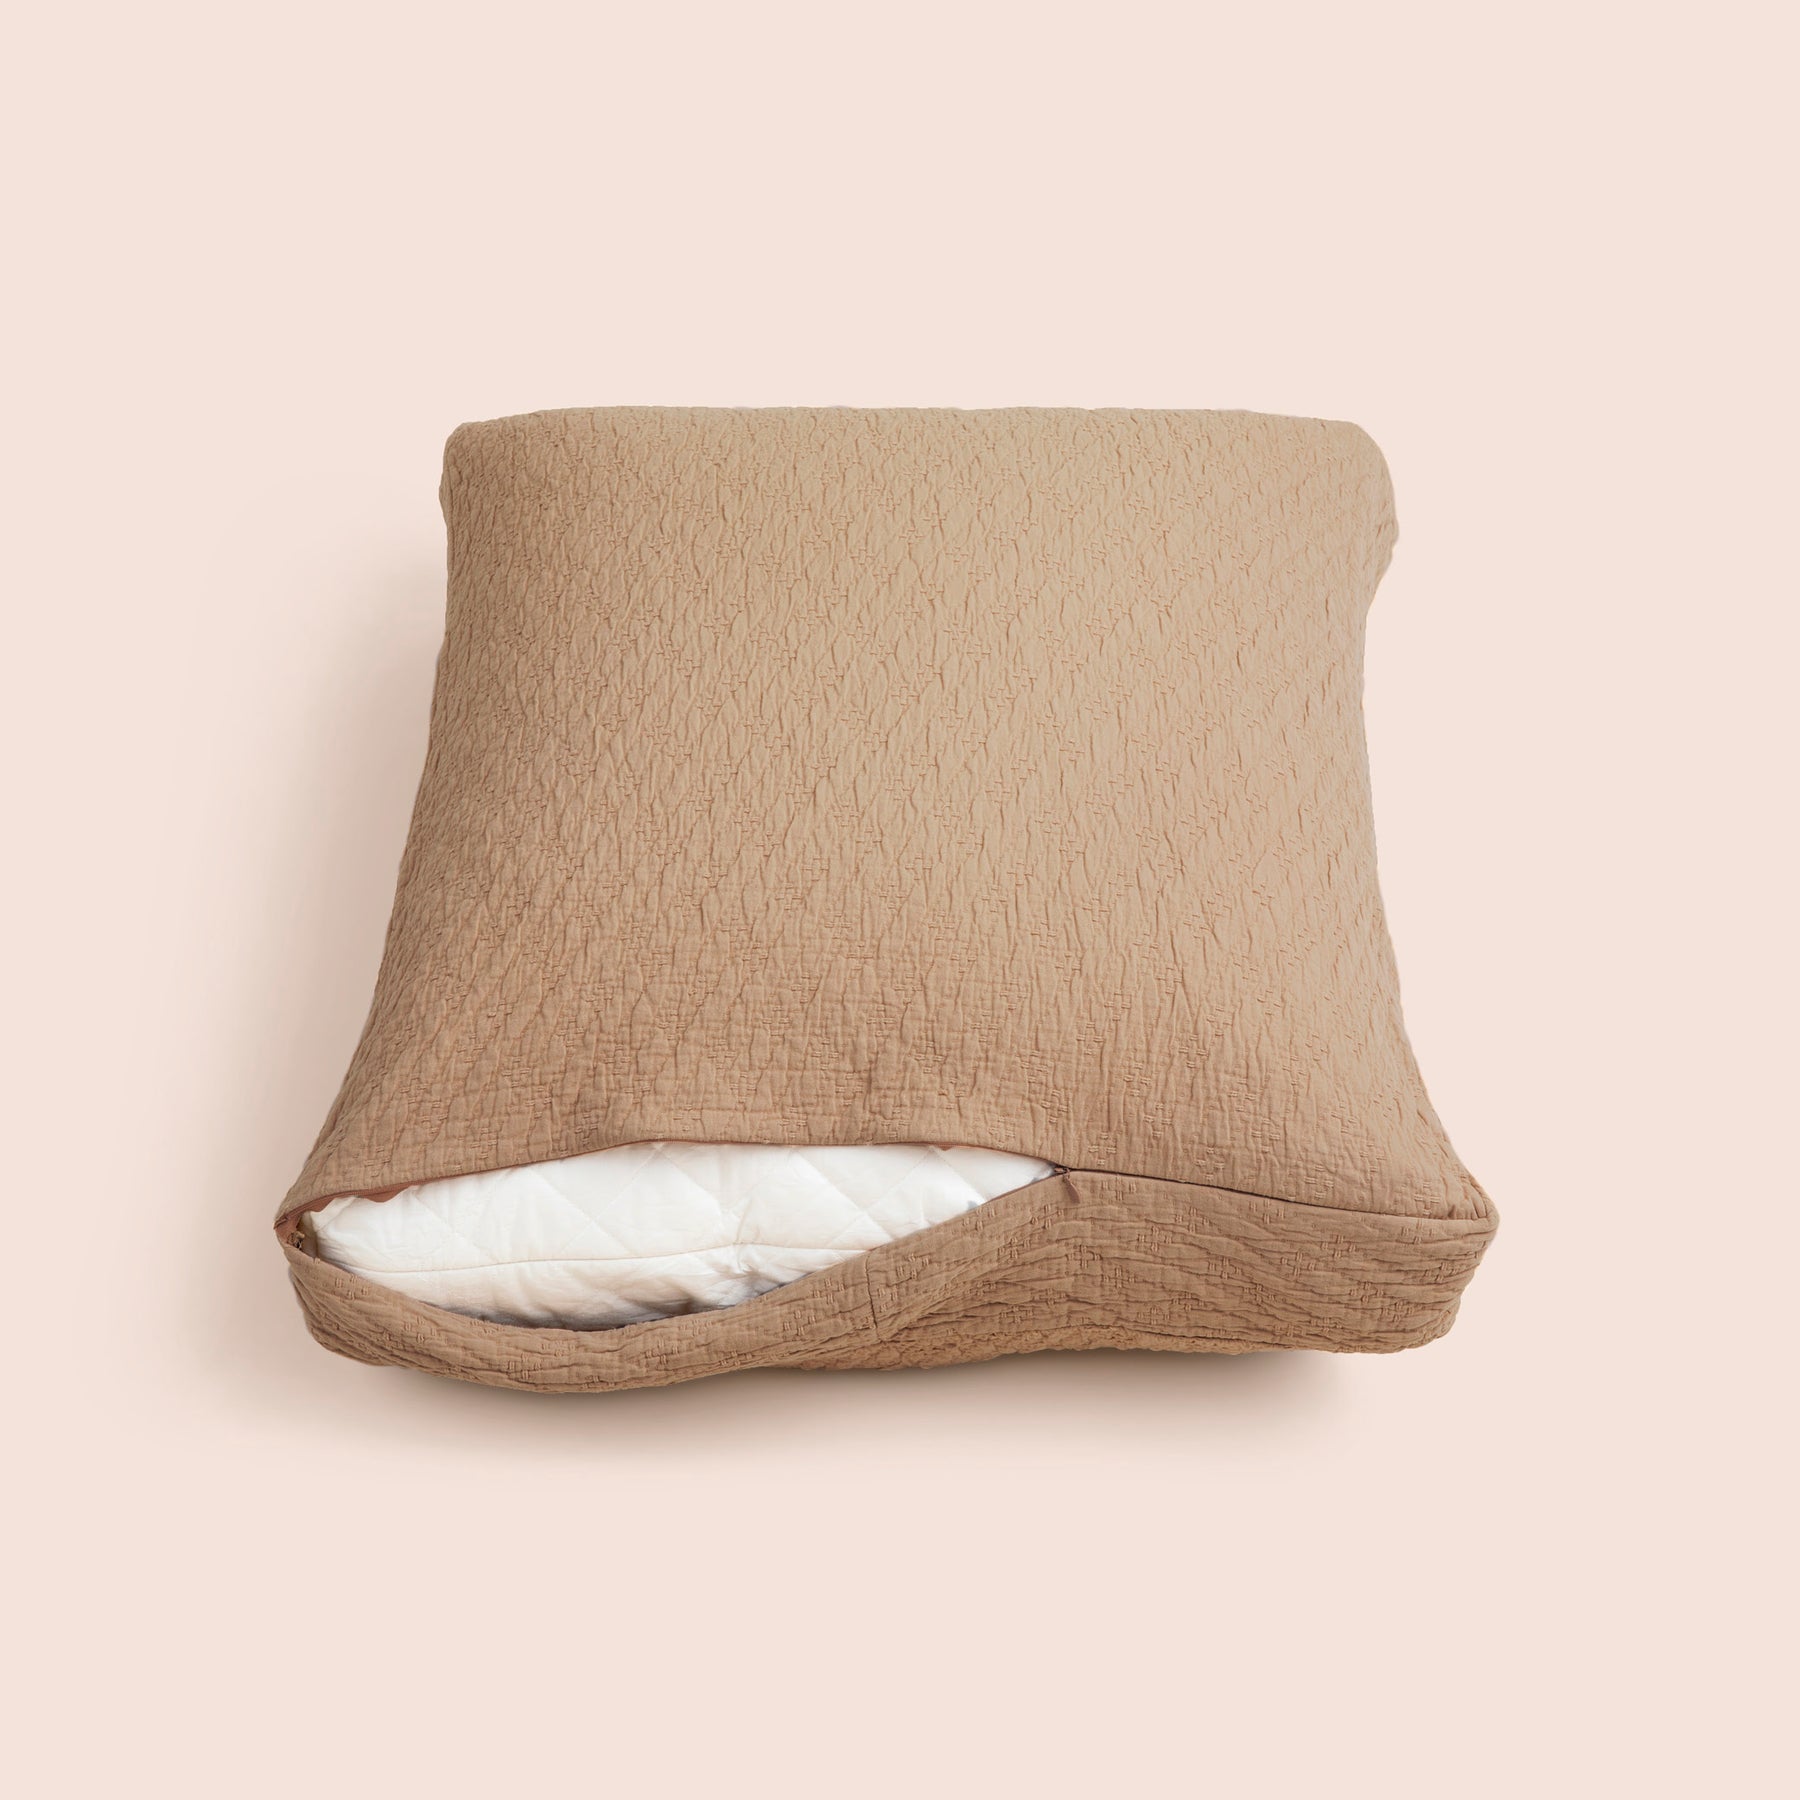 Image of the Ochre Wave Meditation Cushion Cover showcasing a slightly opened zipper with a meditation cushion inside on a light pink background 